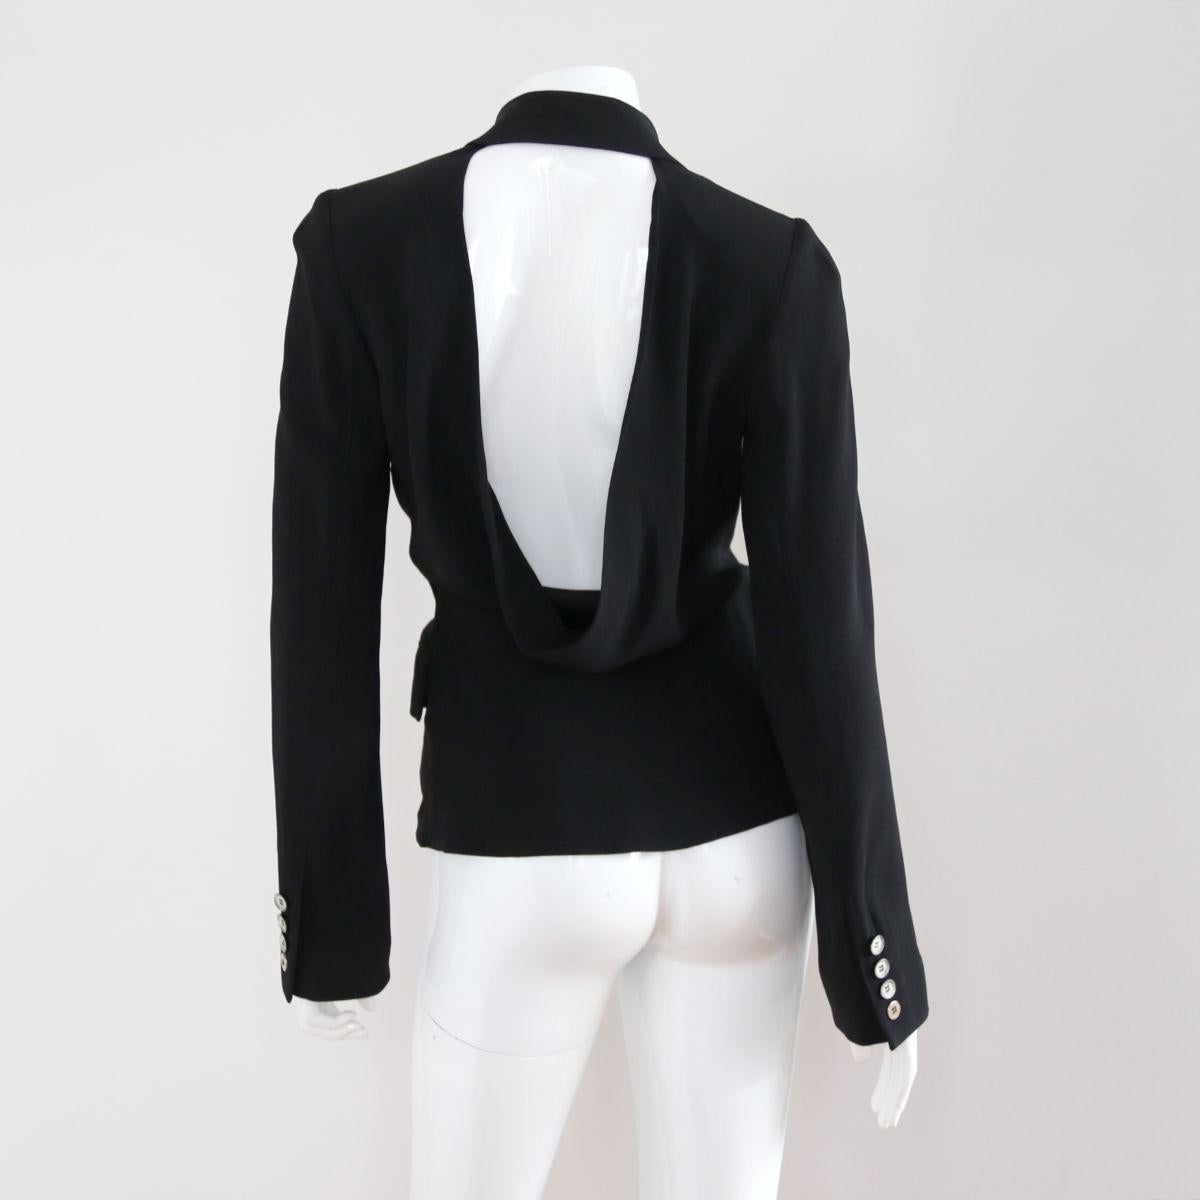 PACO RABANNE 2000s Black Blazer / Jacket With A Large Cut-Out Back  1